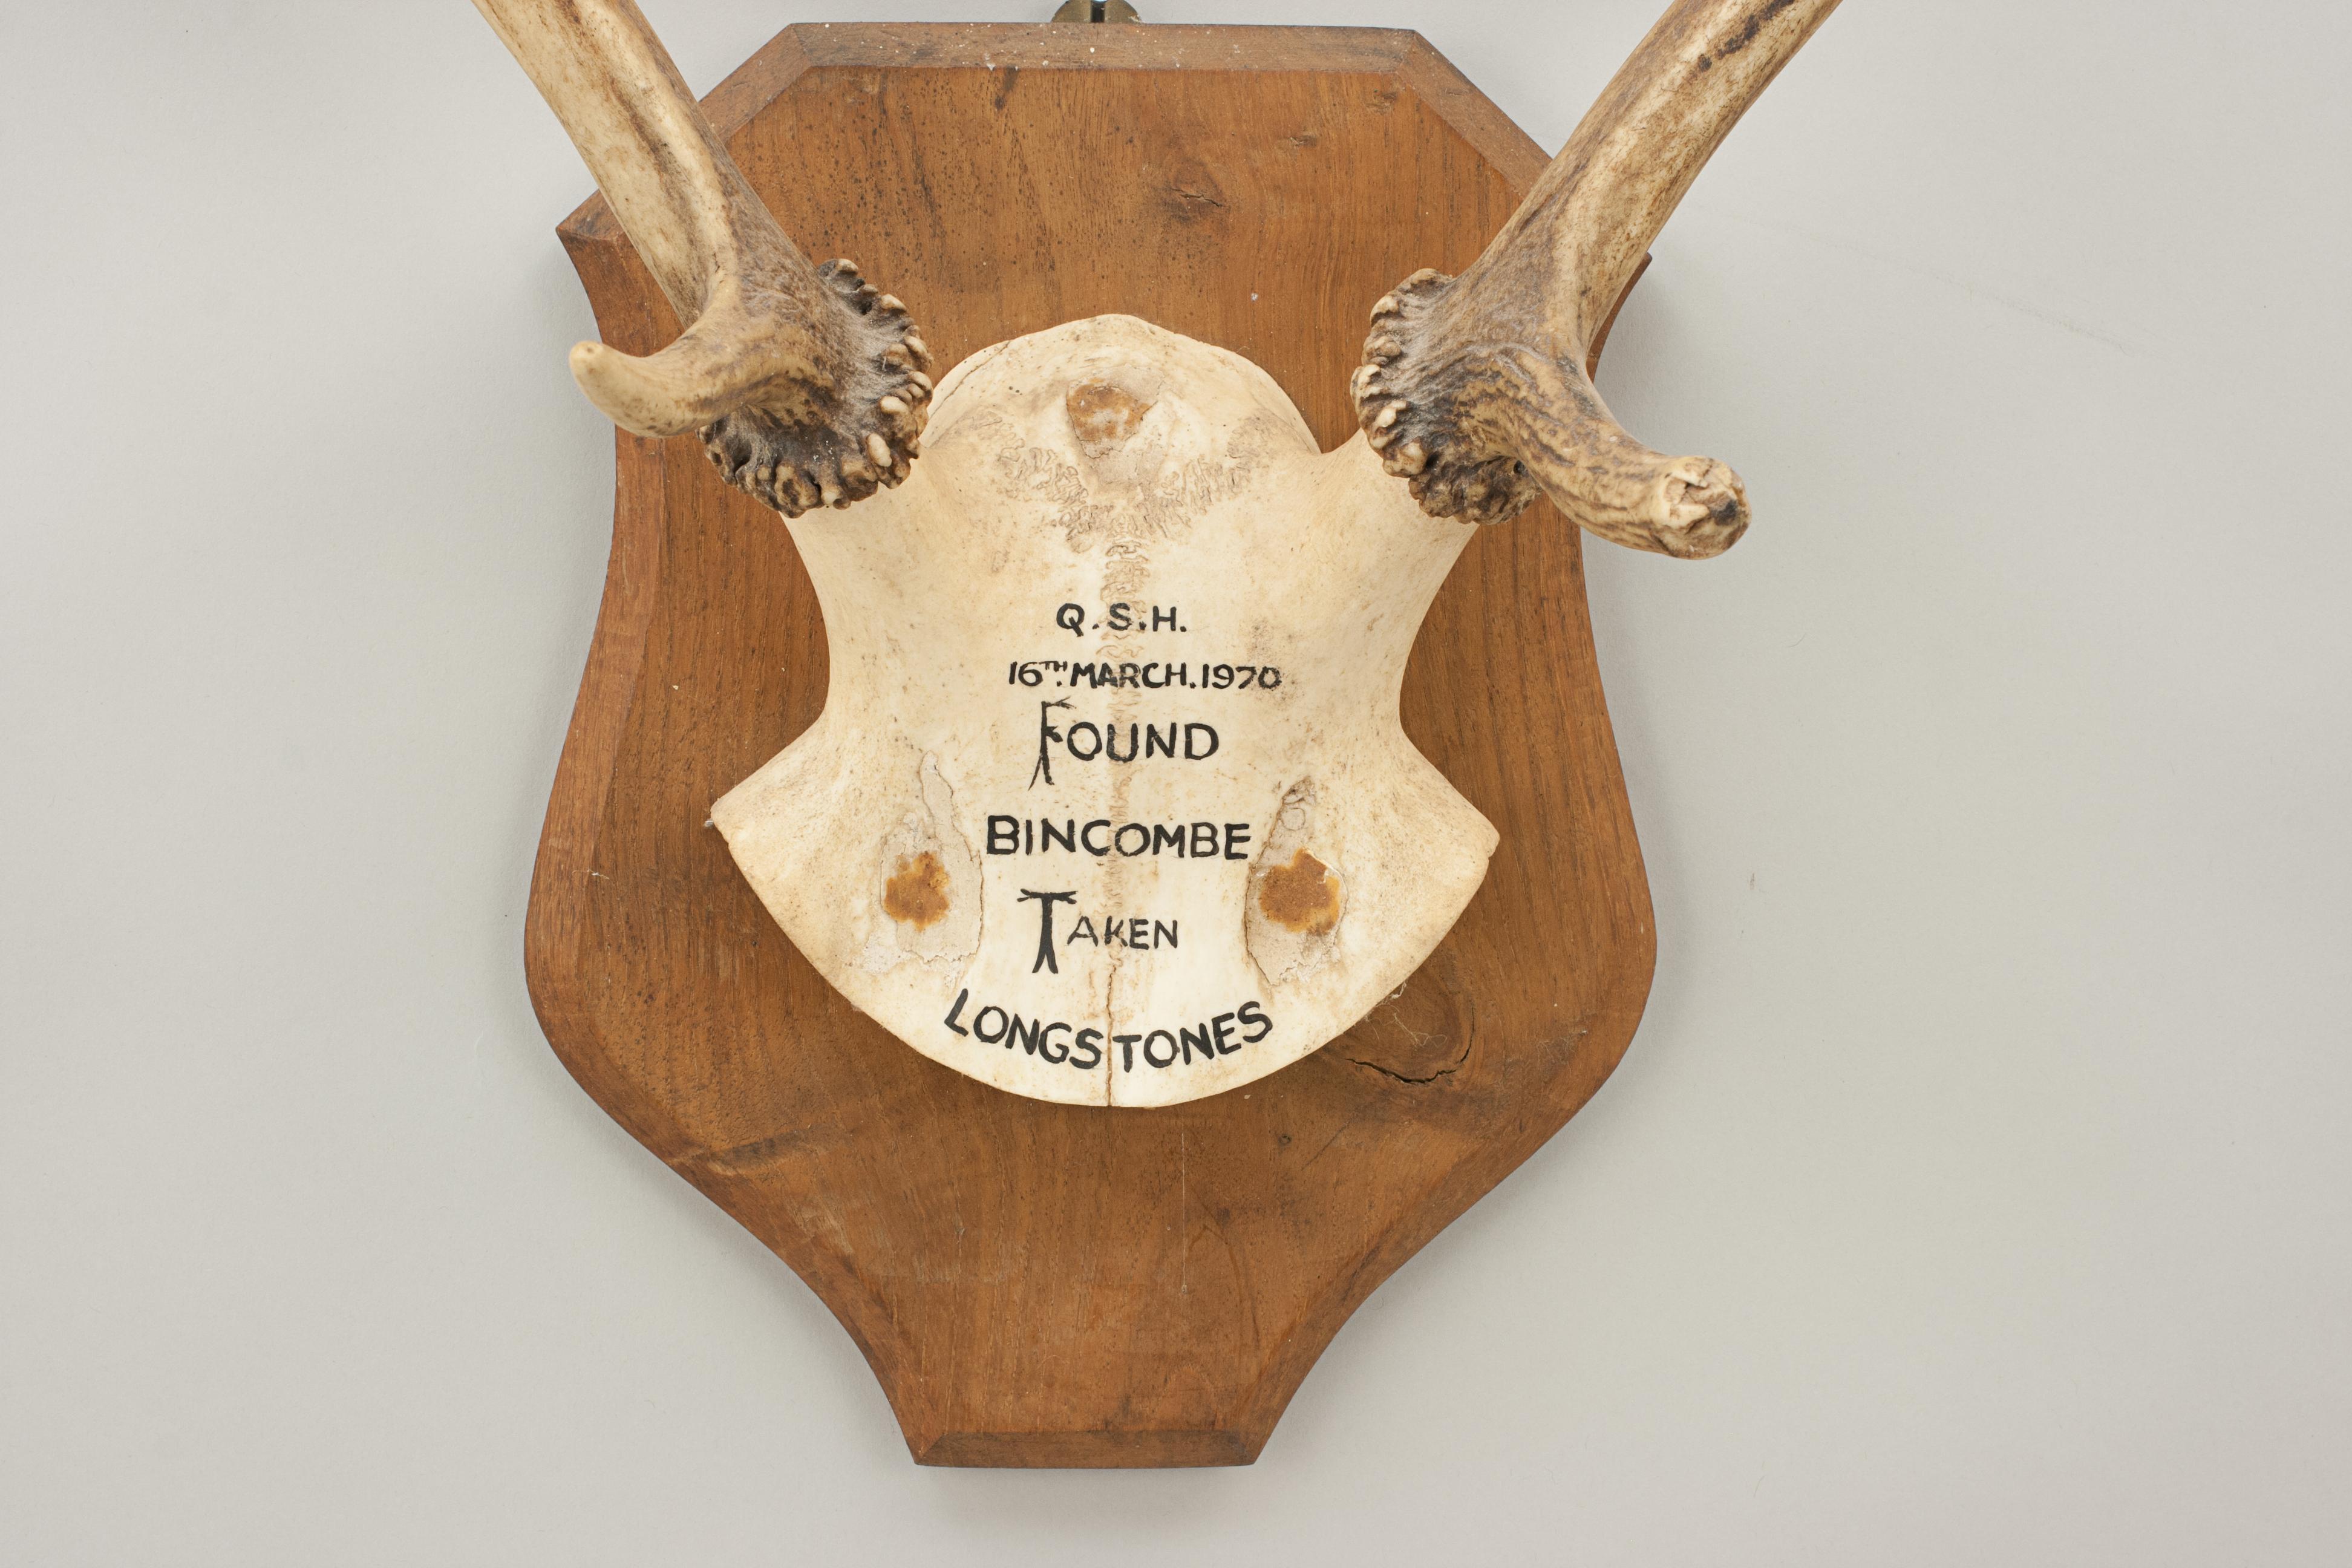 Red Deer Antlers, Bincombe - Longstones 1970.
A pair of 6 point red deer antlers with skull cap, mounted onto a wooden plaque. The shield is made from oak with profile edges. These stag antlers are an excellent wall display. Inscribed on the skull